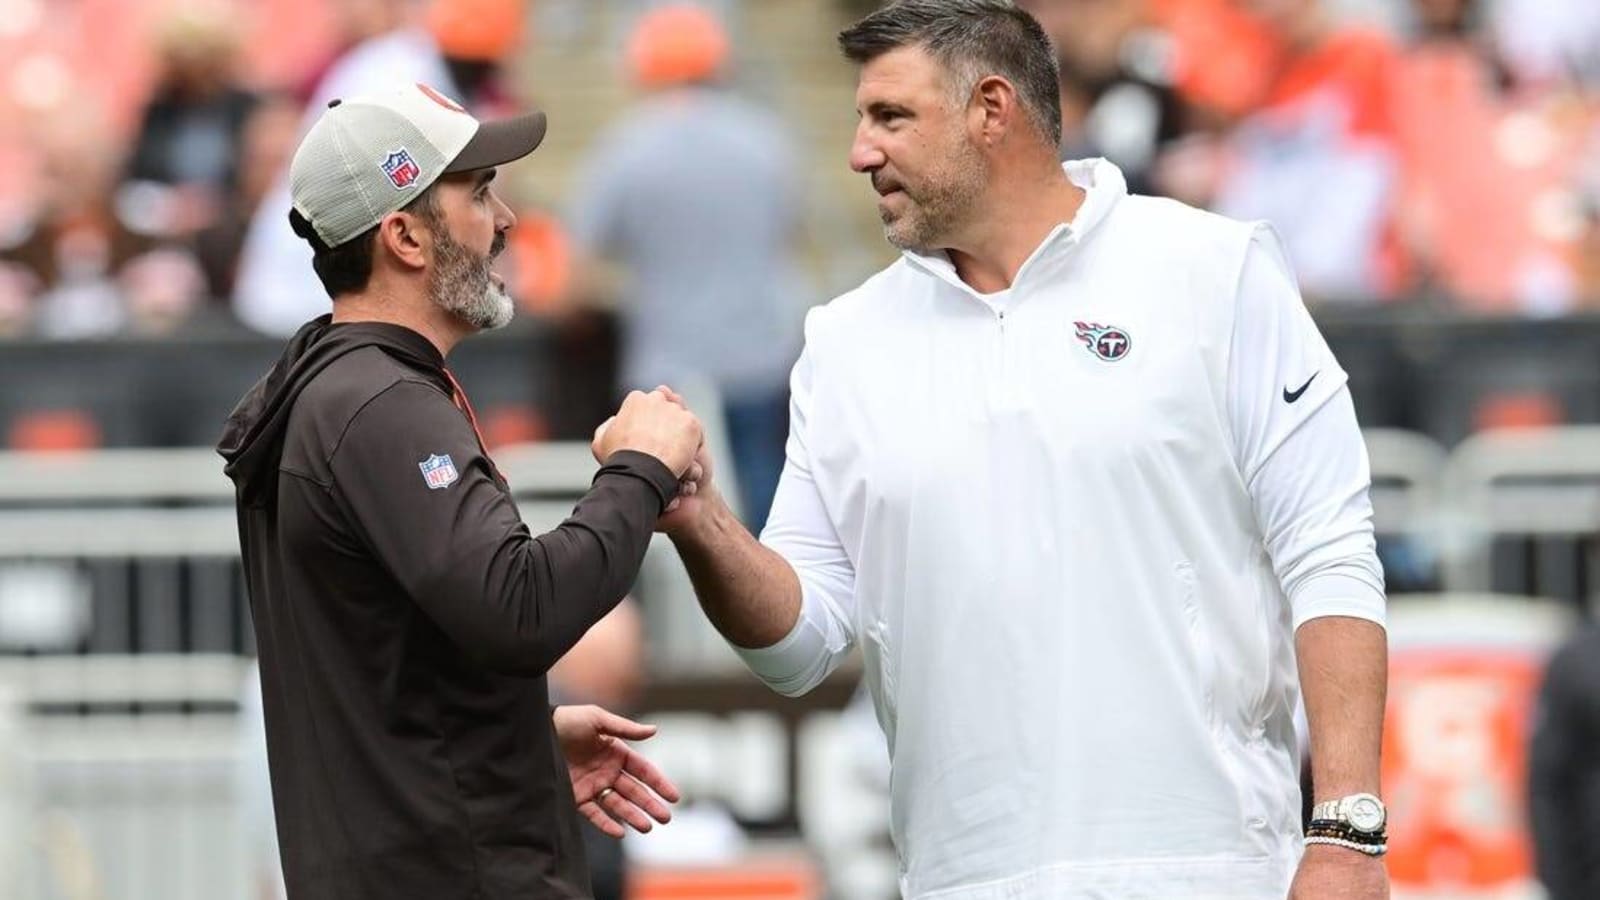 Reports: Ex-Titans coach Mike Vrabel joins Browns as consultant